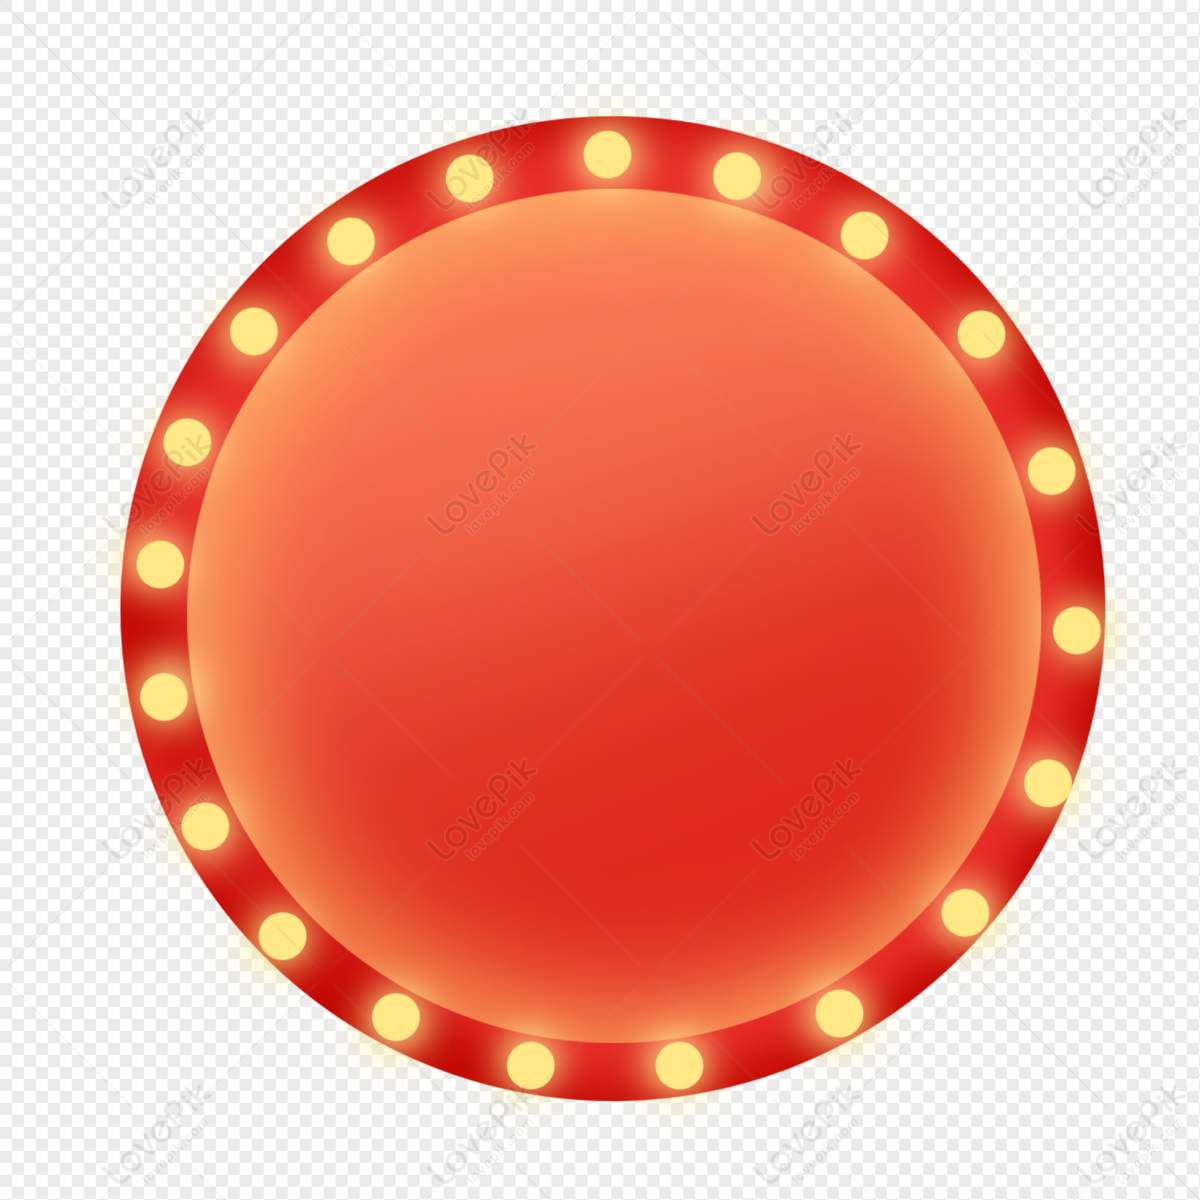 Red Round Label PNG Transparent Background And Clipart Image For Free  Download - Lovepik | 401547020